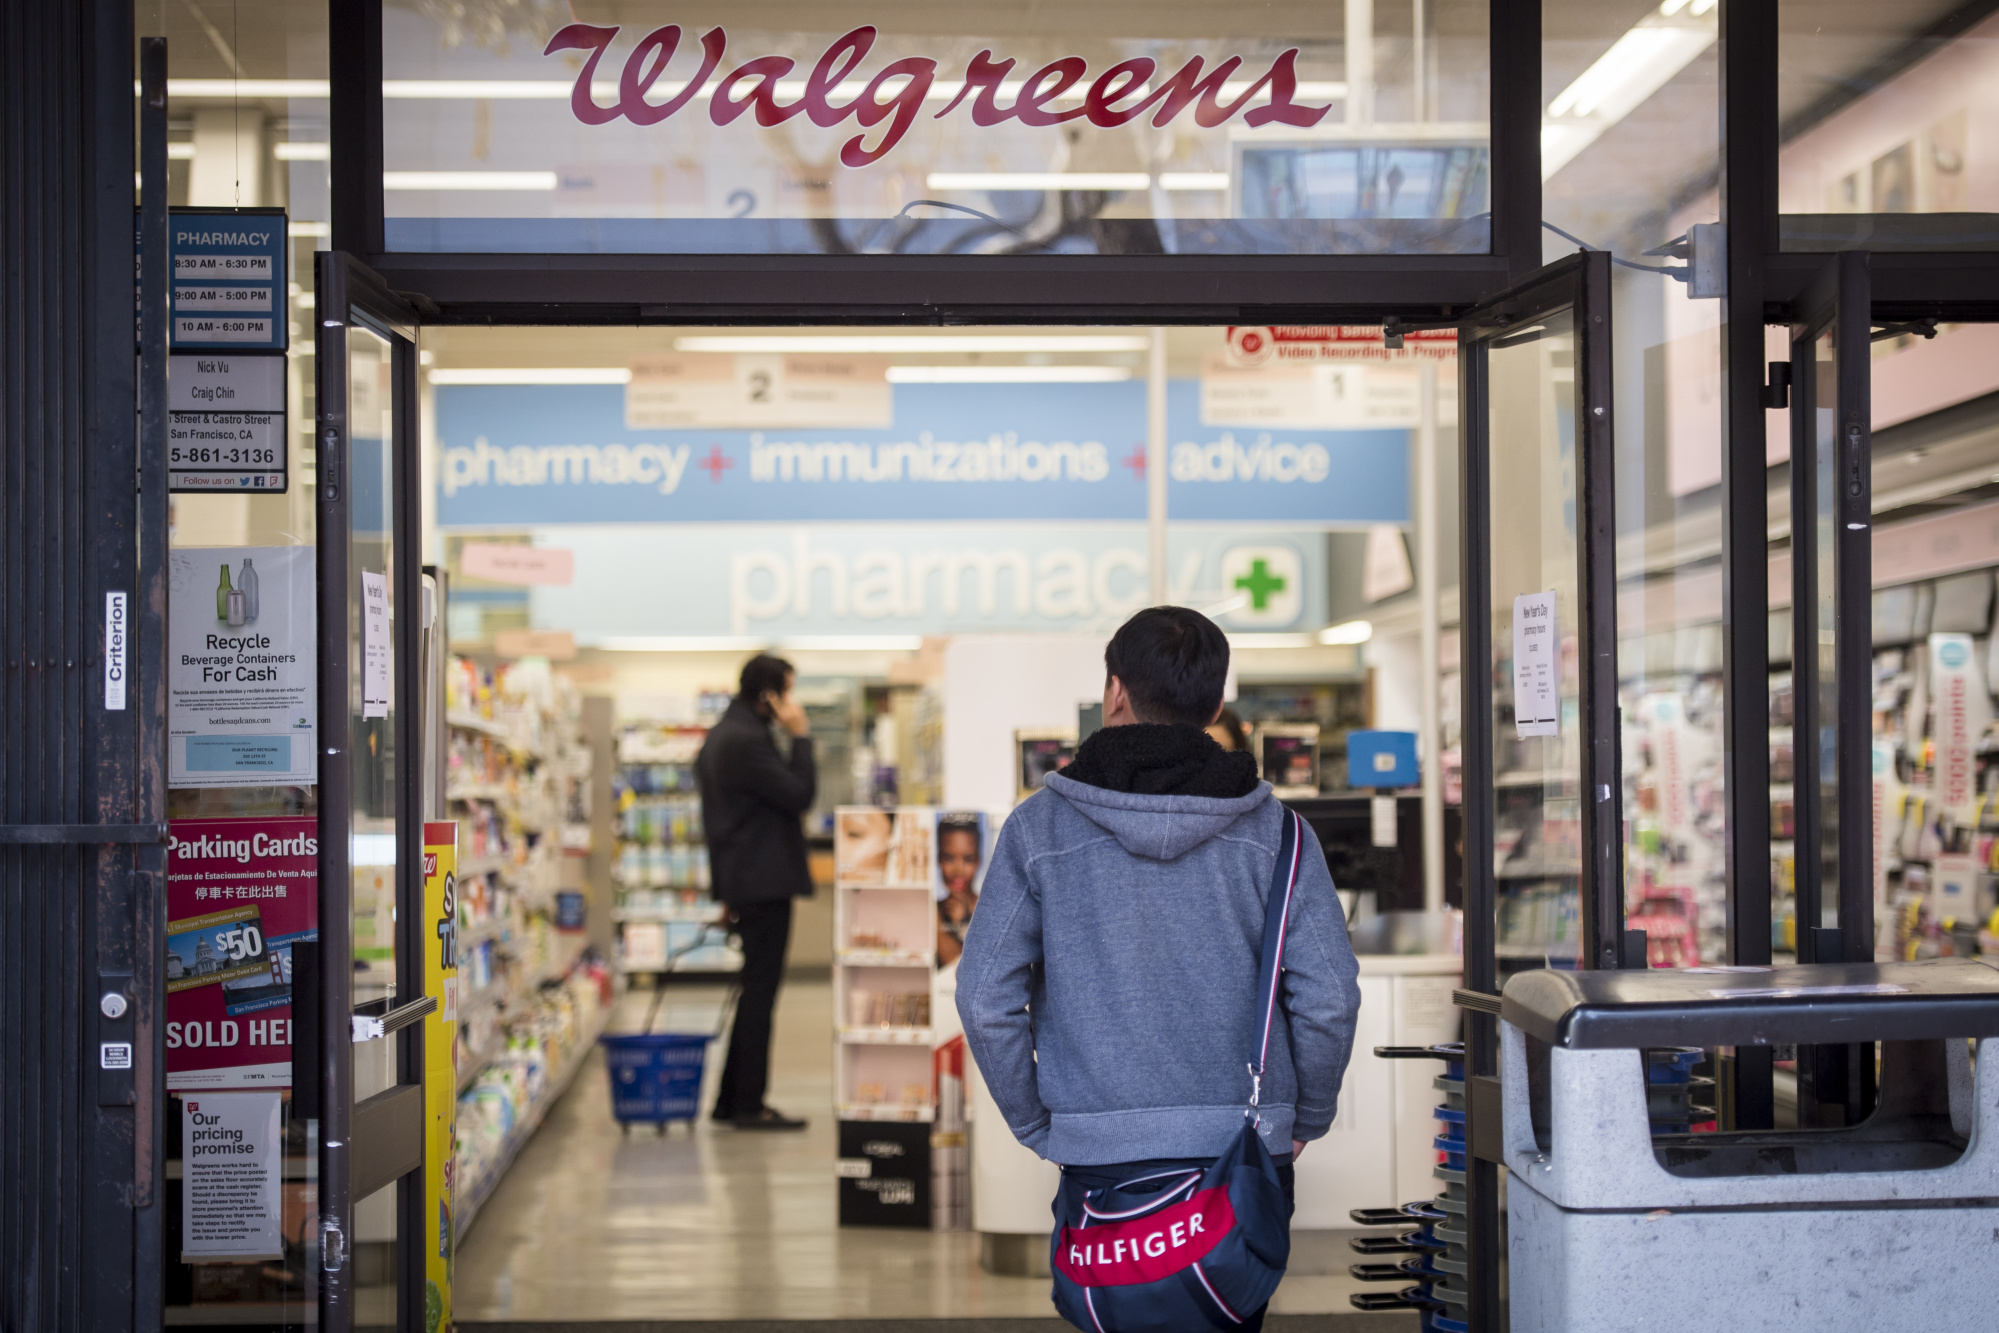 Walgreens Launches 24-Hour Same Day Delivery, Offering the Most Retail Items  for Around the Clock Delivery Across the Country